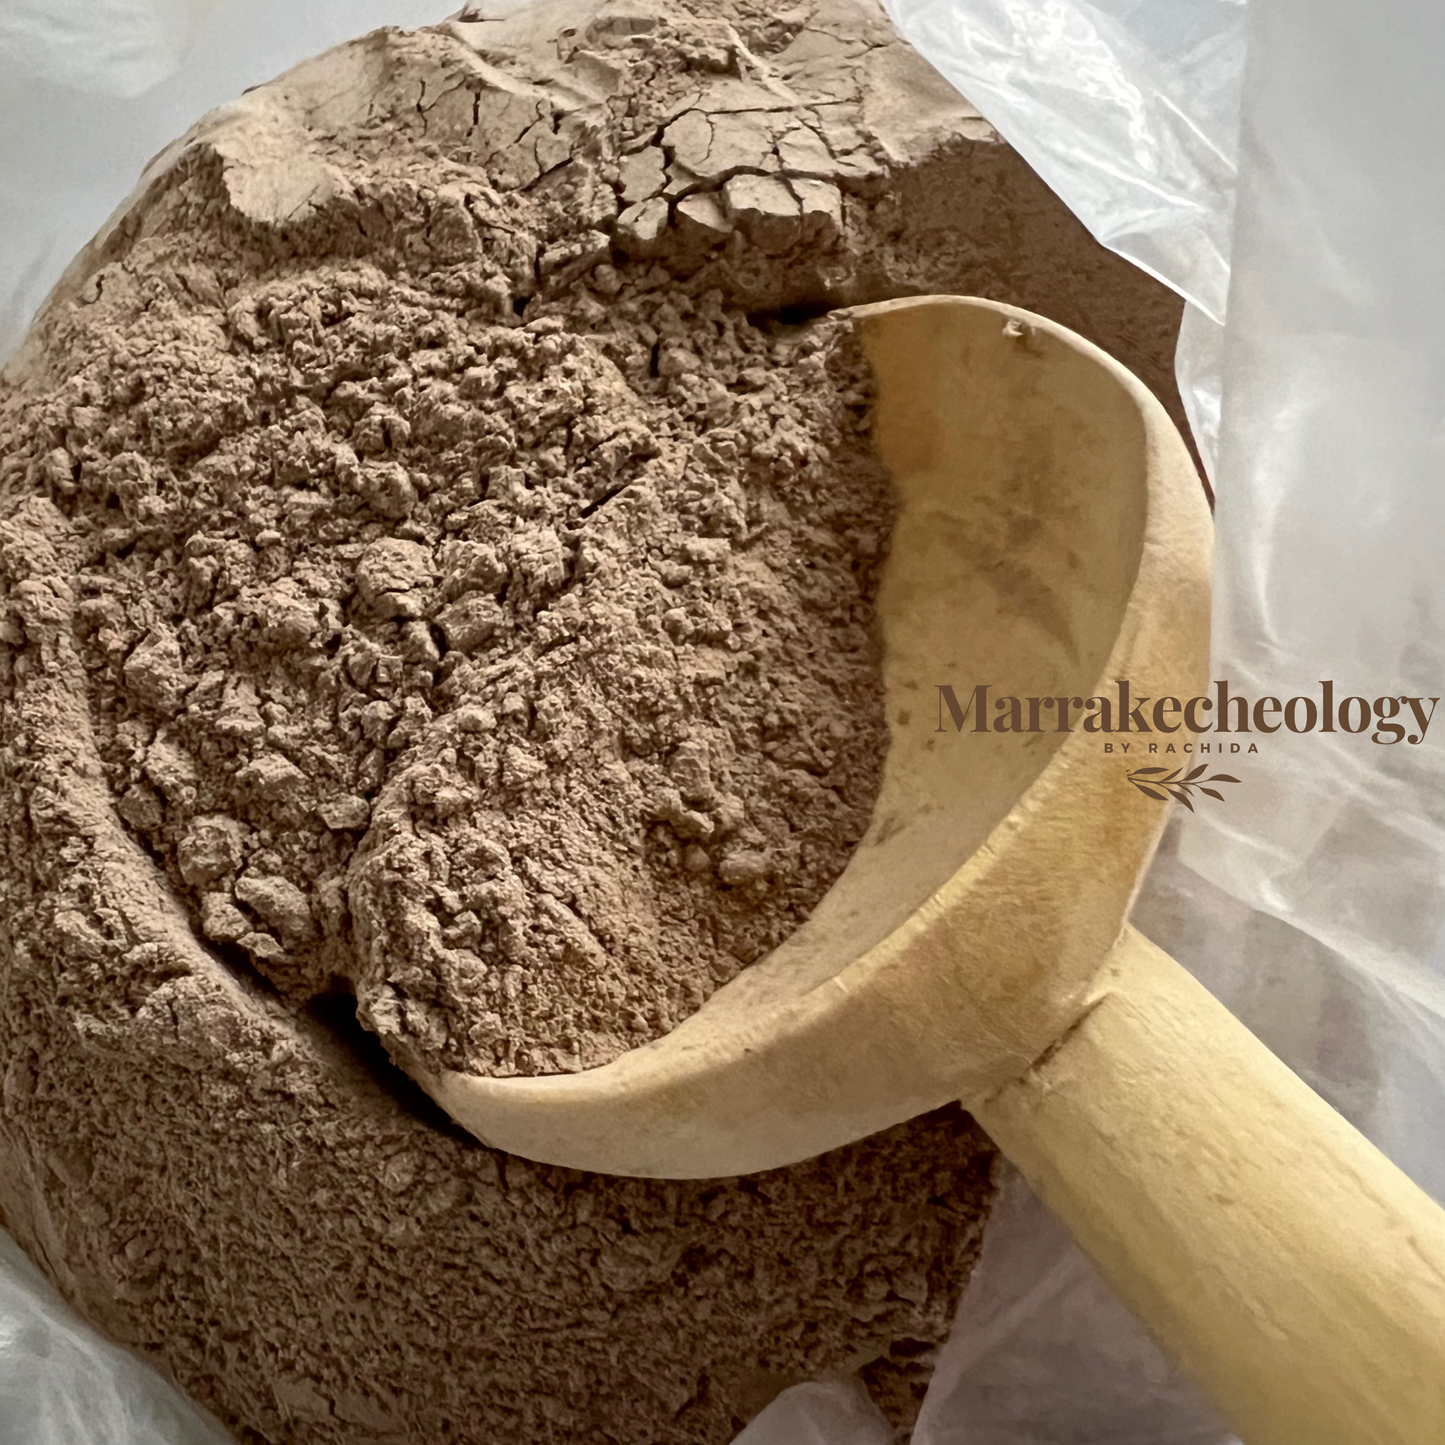 GHASSOUL Moroccan lava clay mask 200g